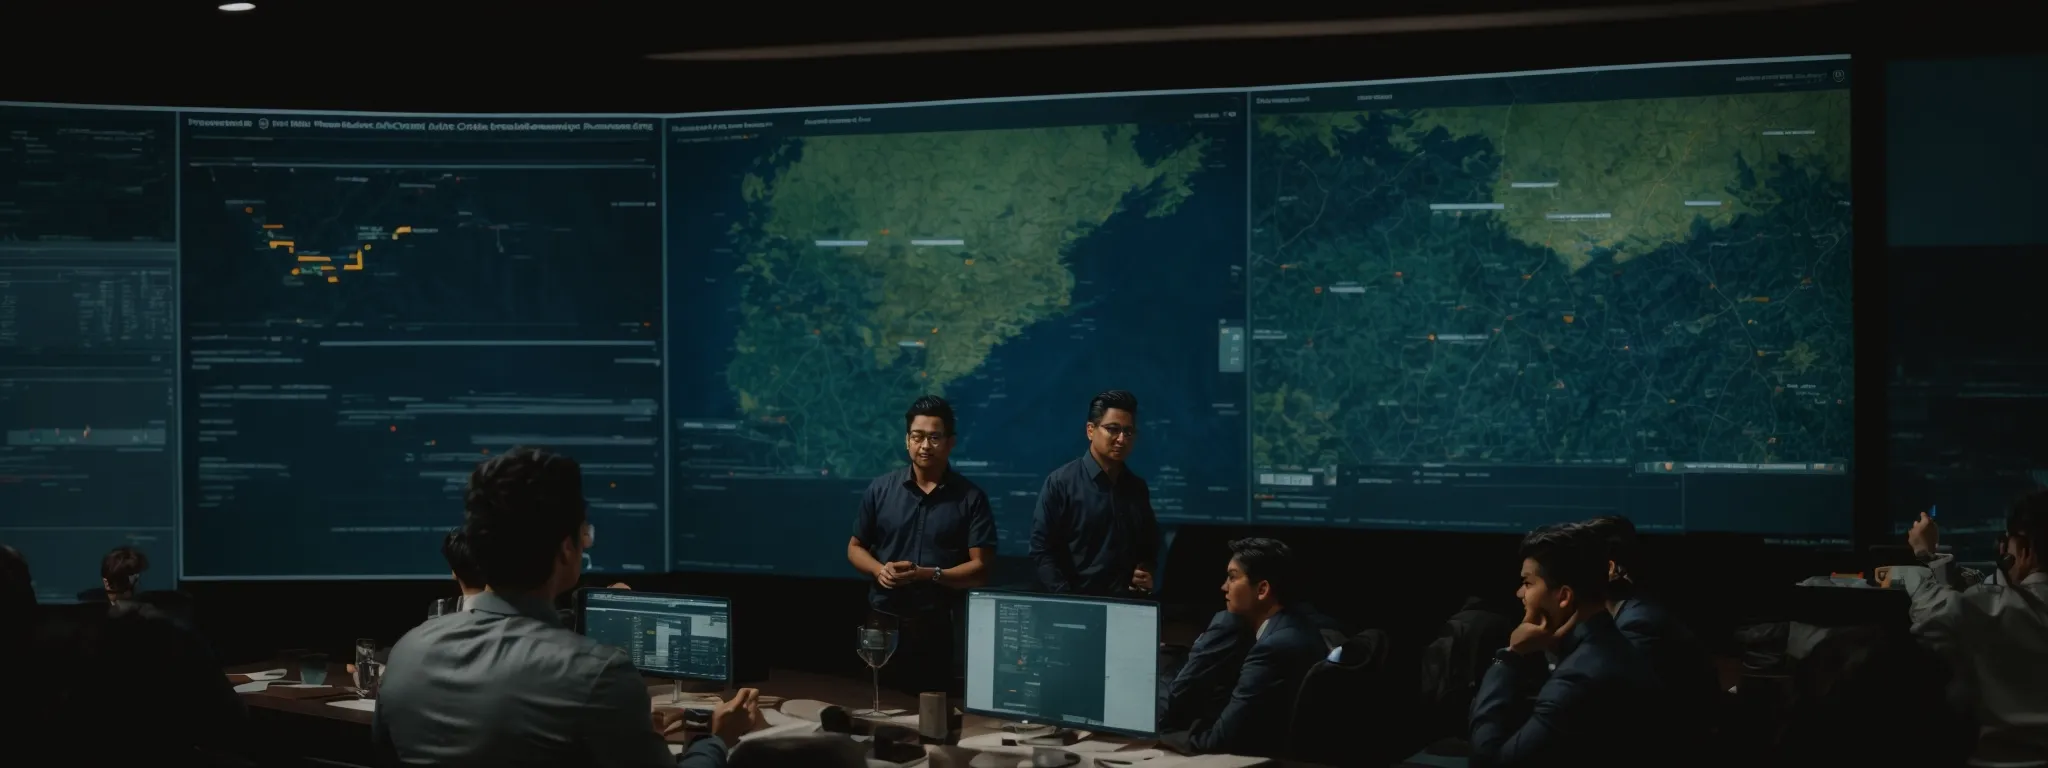 a group of professionals discussing strategies over a digital map on a large screen.